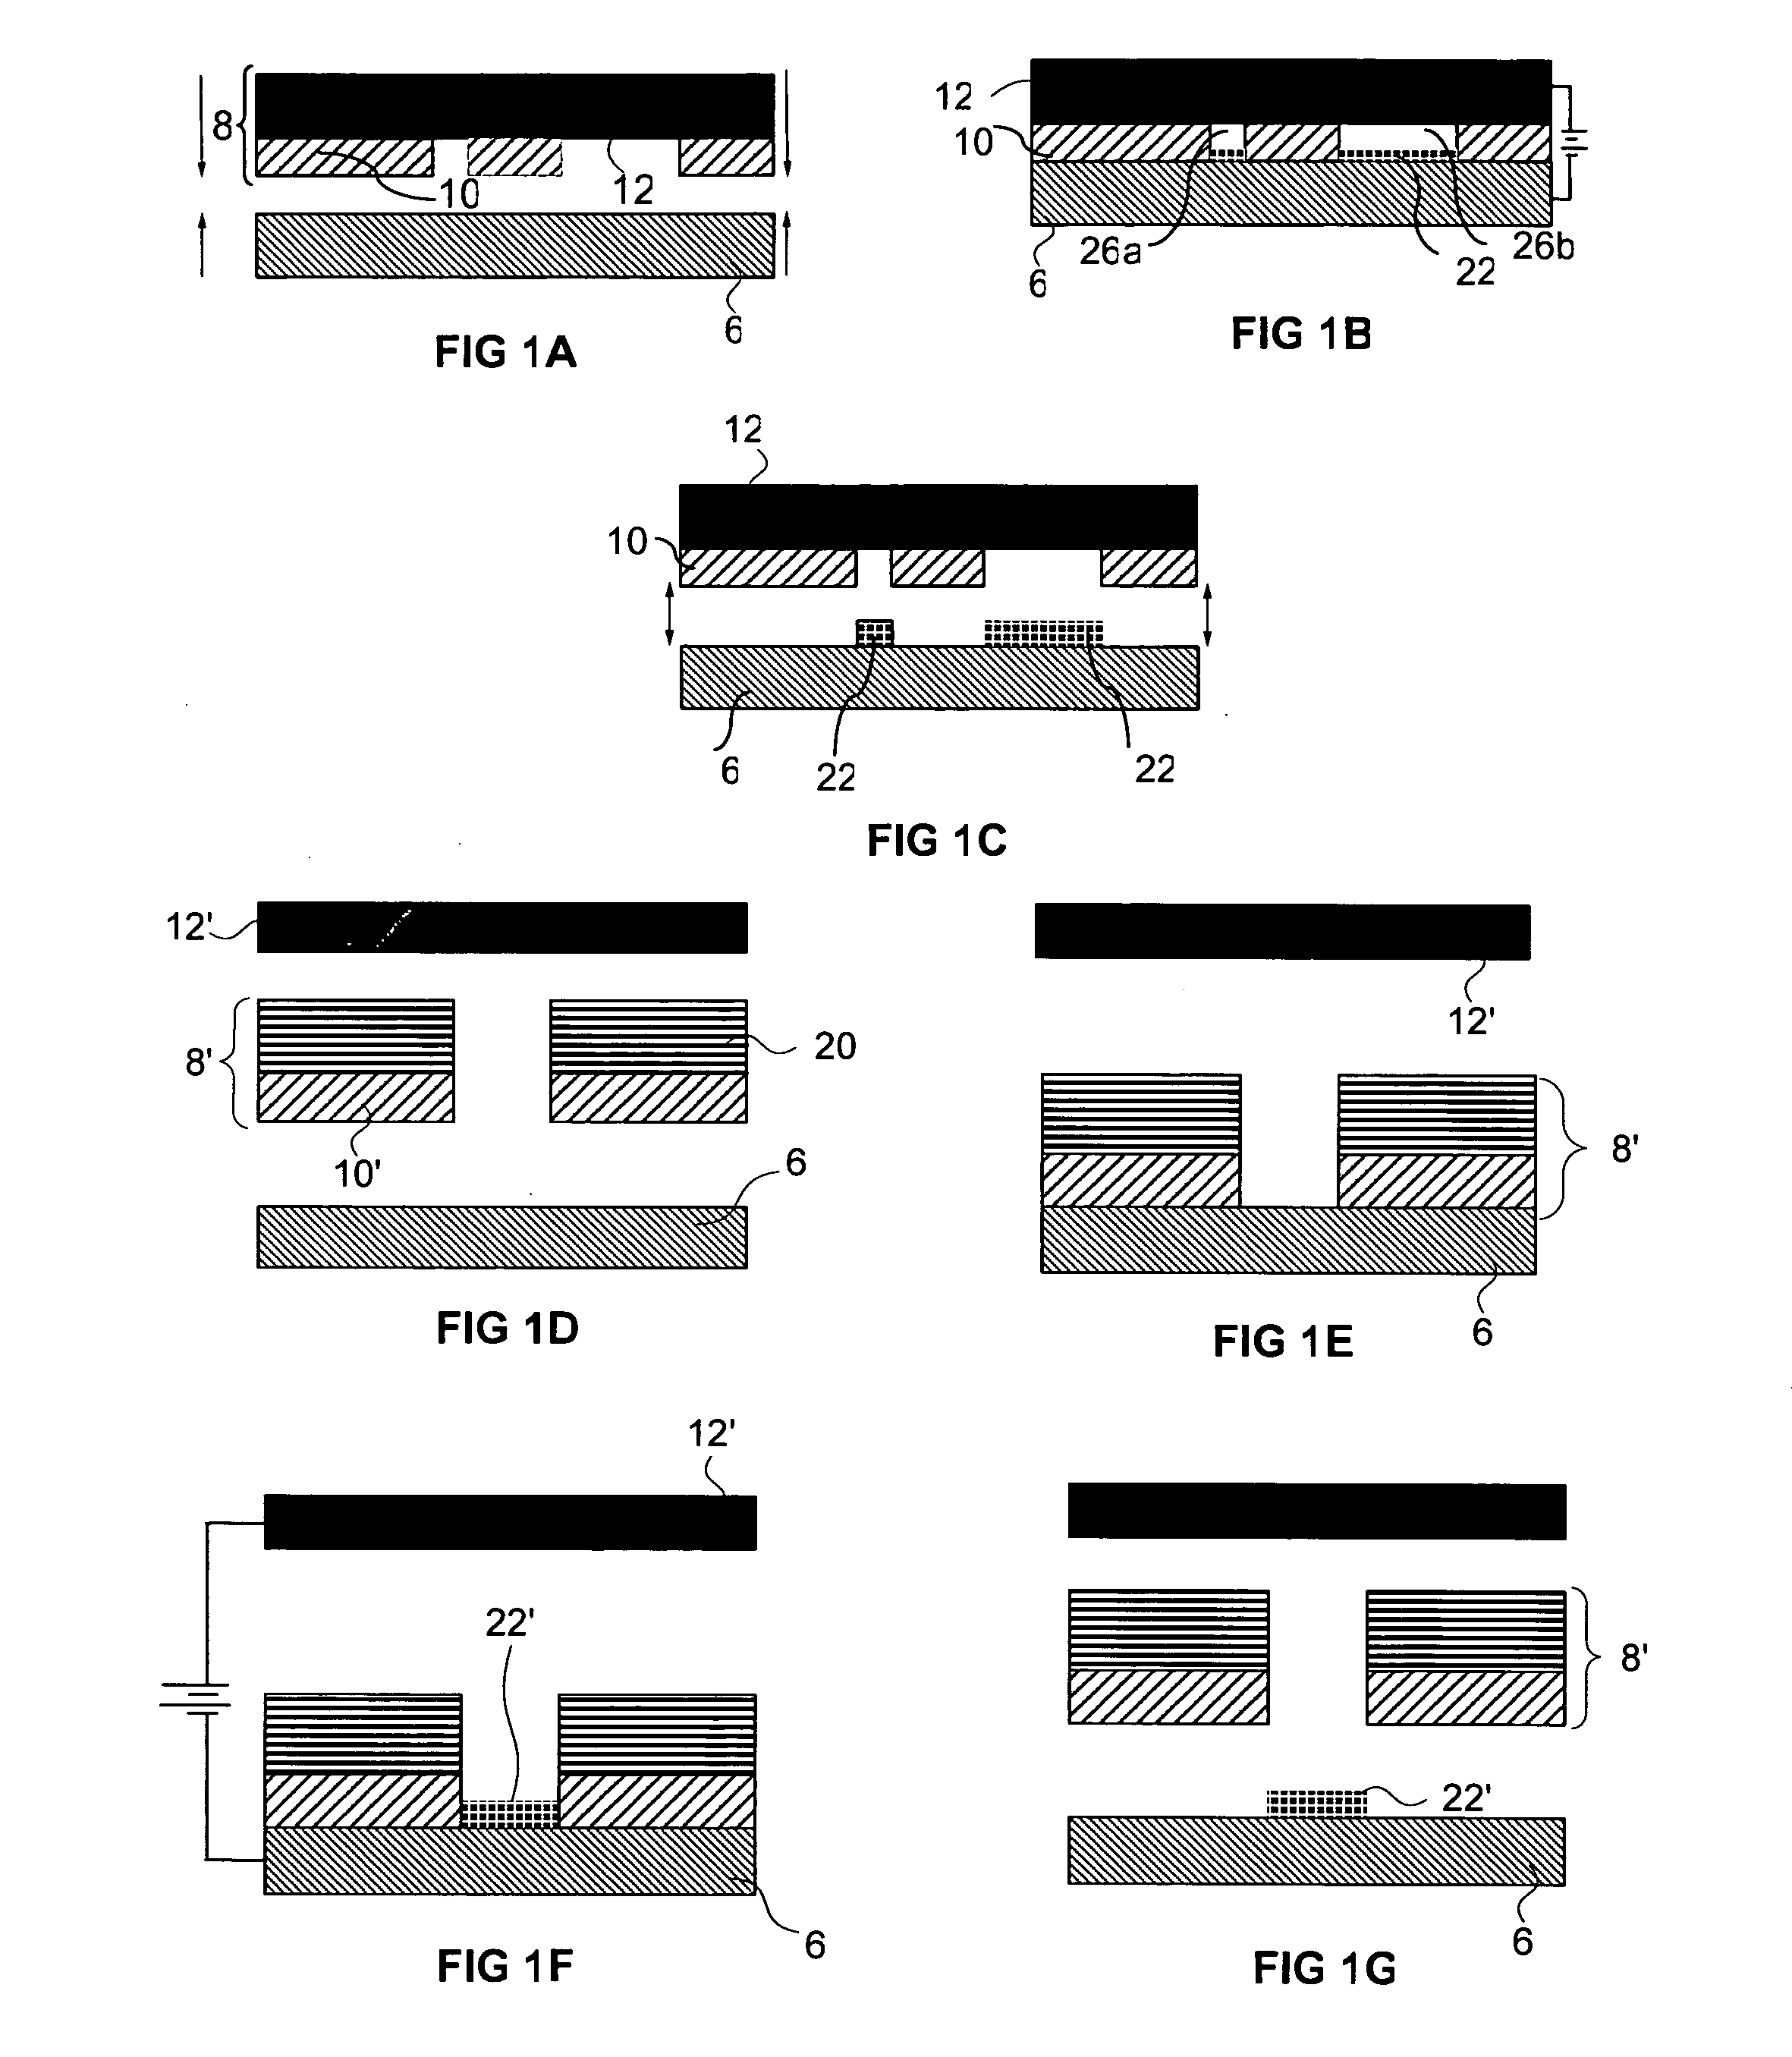 Three-dimensional structures having feature sizes smaller than a minimum feature size and methods for fabricating